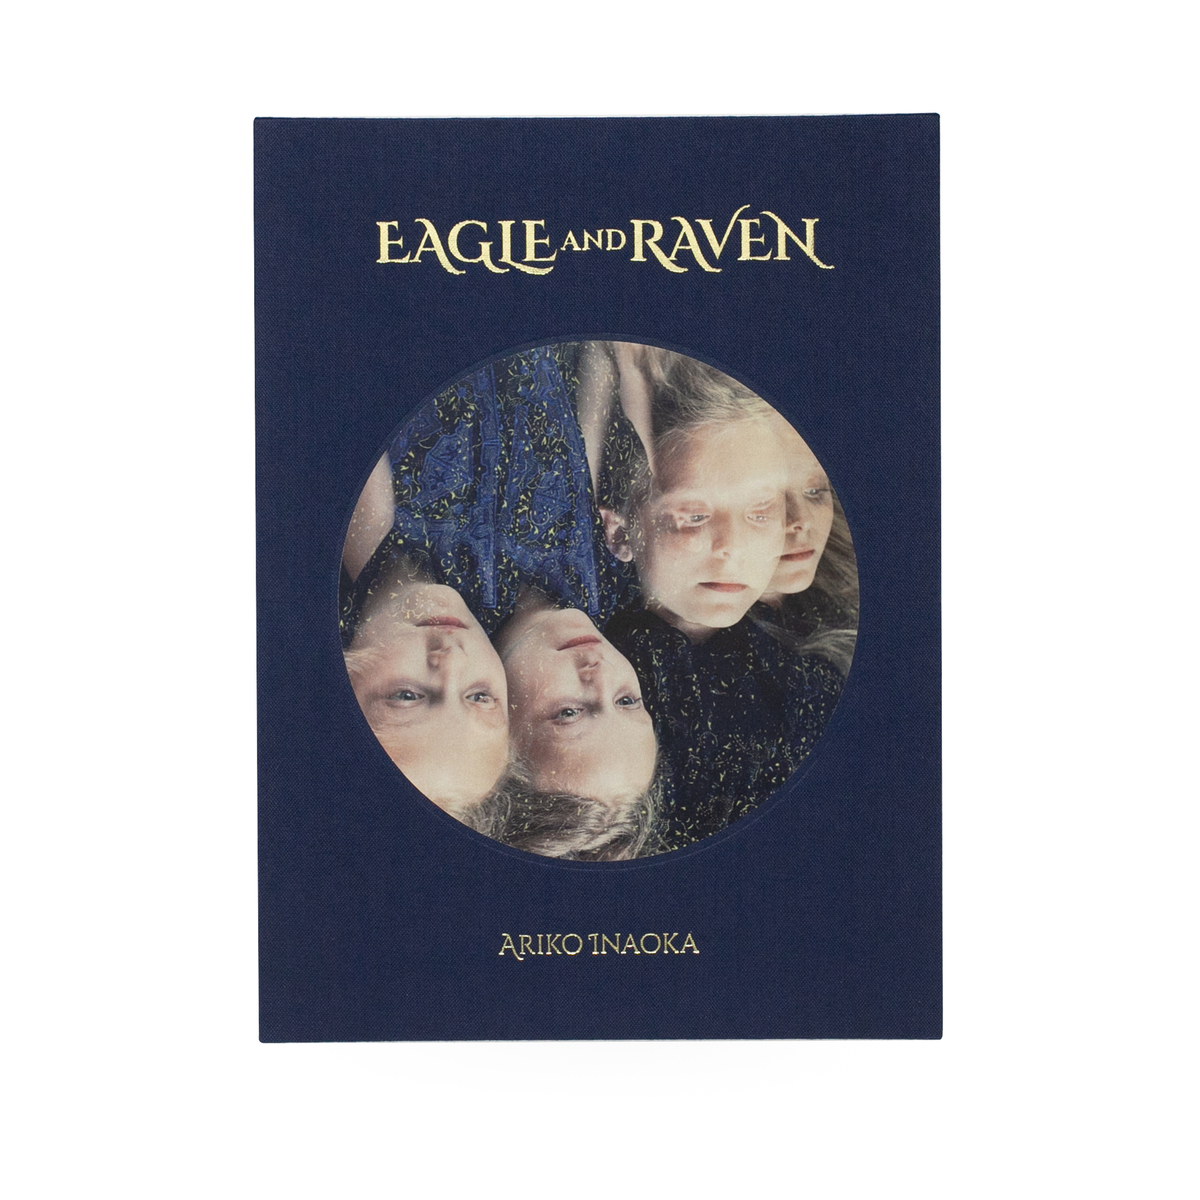 "Eagle and Raven," published by akaaka.